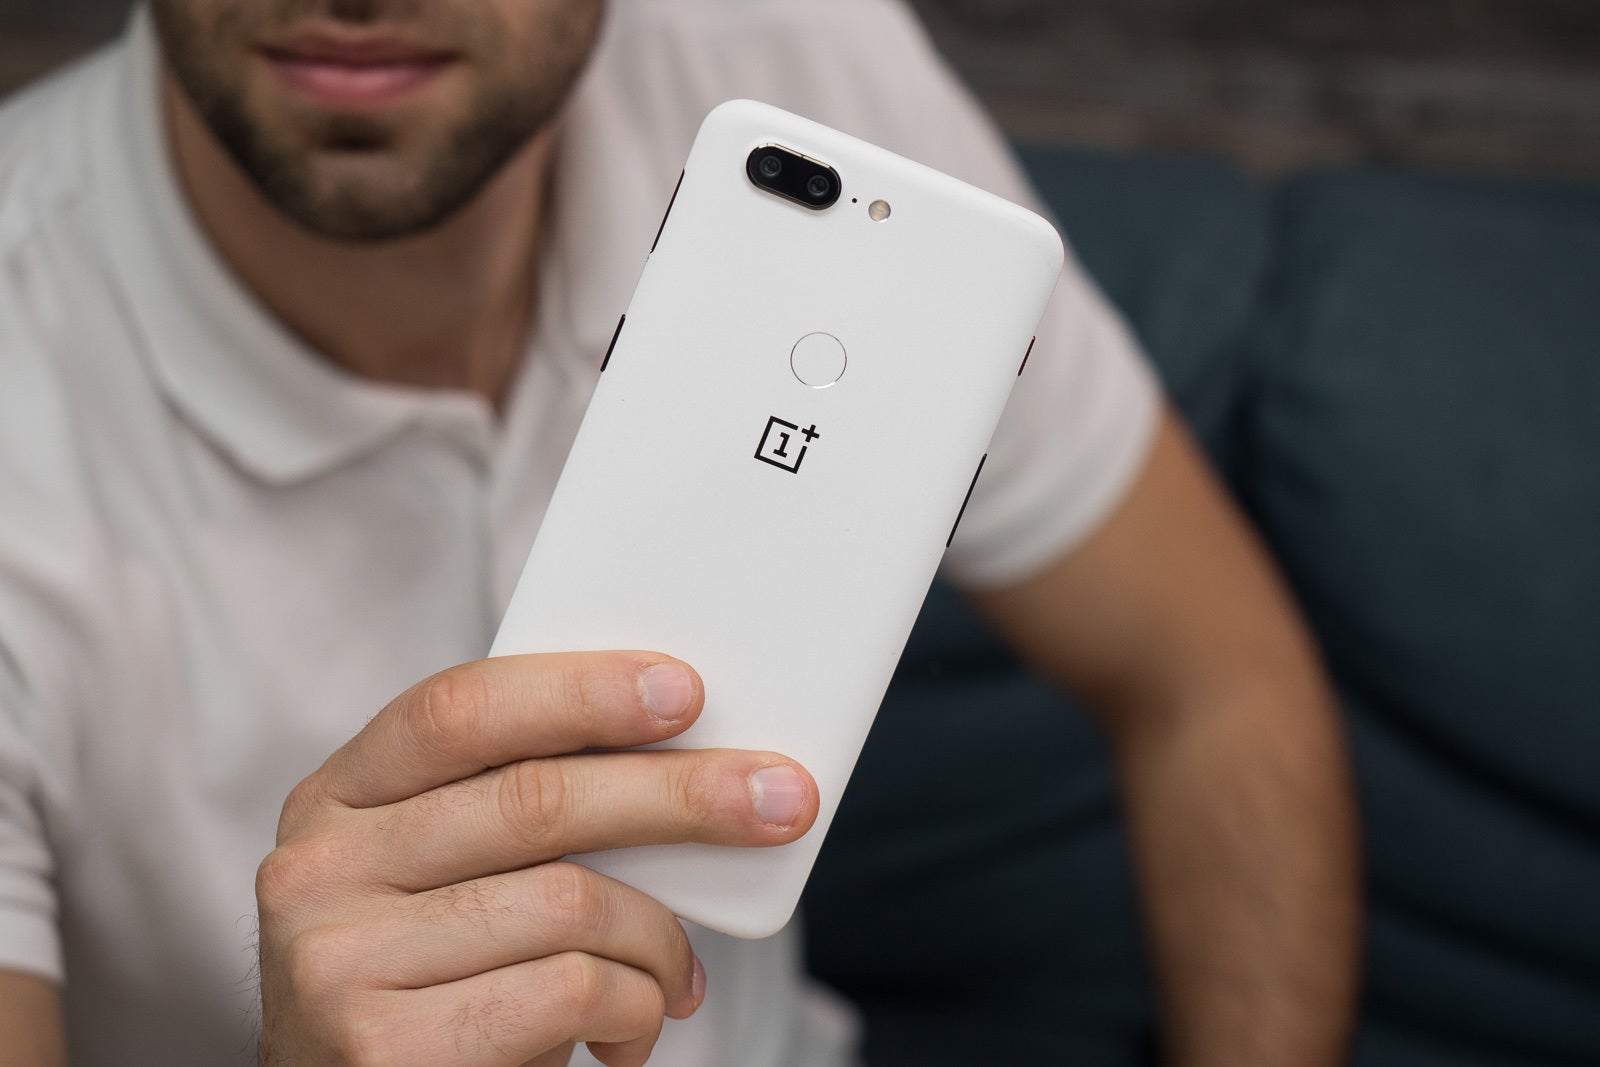 White and boujee - I think OnePlus peaked with this phone, and nothing since comes close to heart